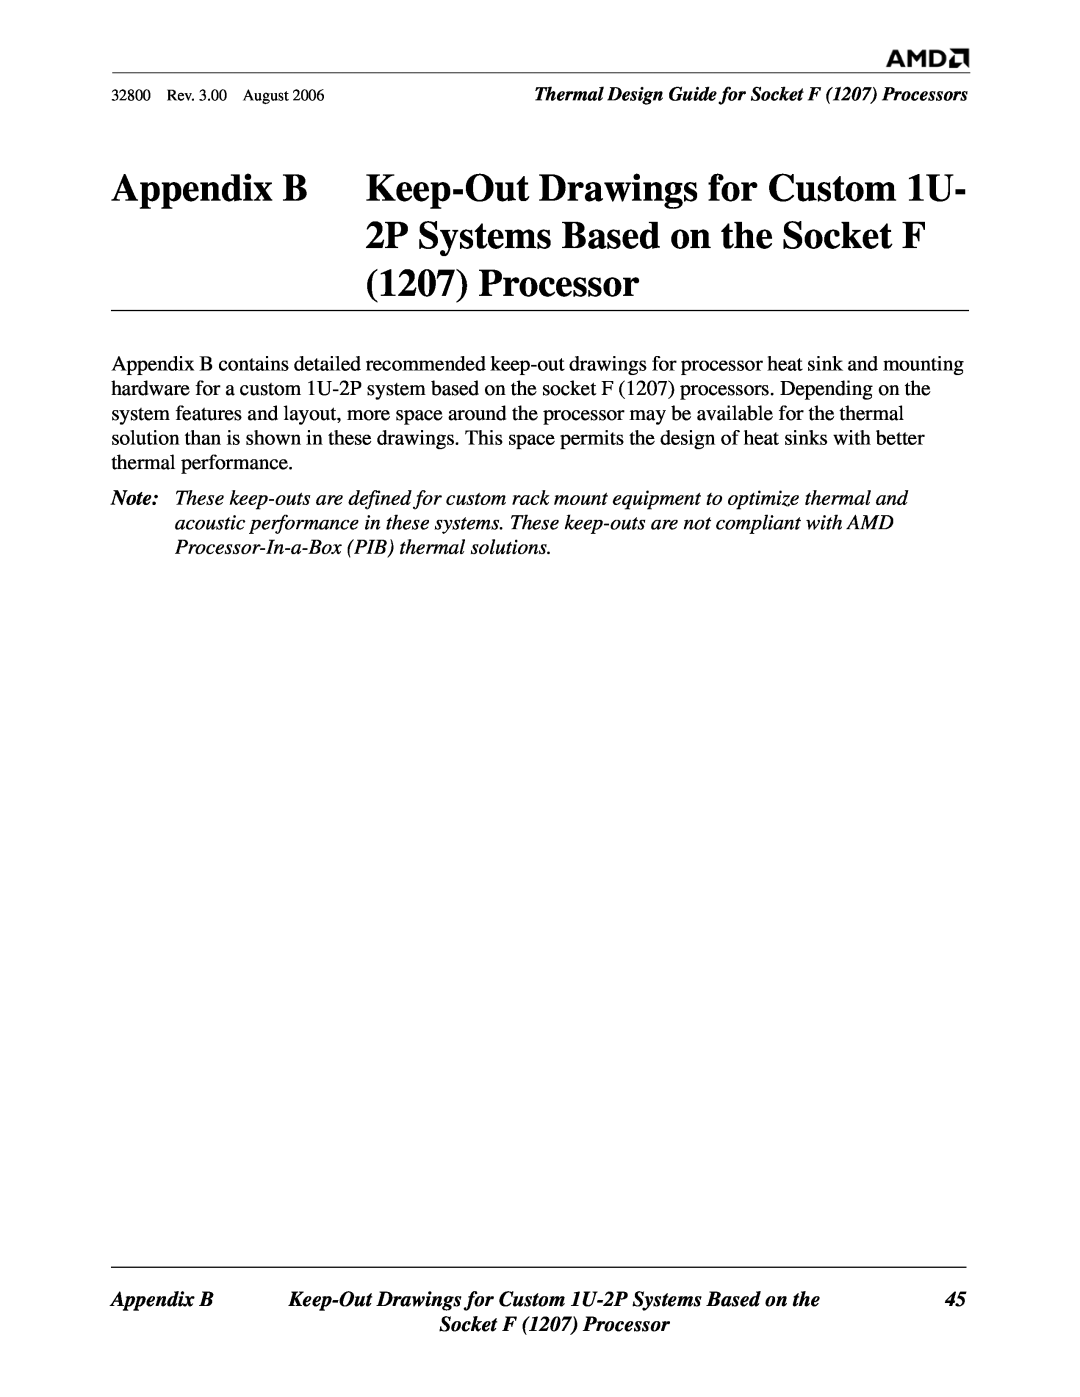 AMD manual Appendix B, Socket F 1207 Processor, Keep-Out Drawings for Custom 1U-2P Systems Based on the 